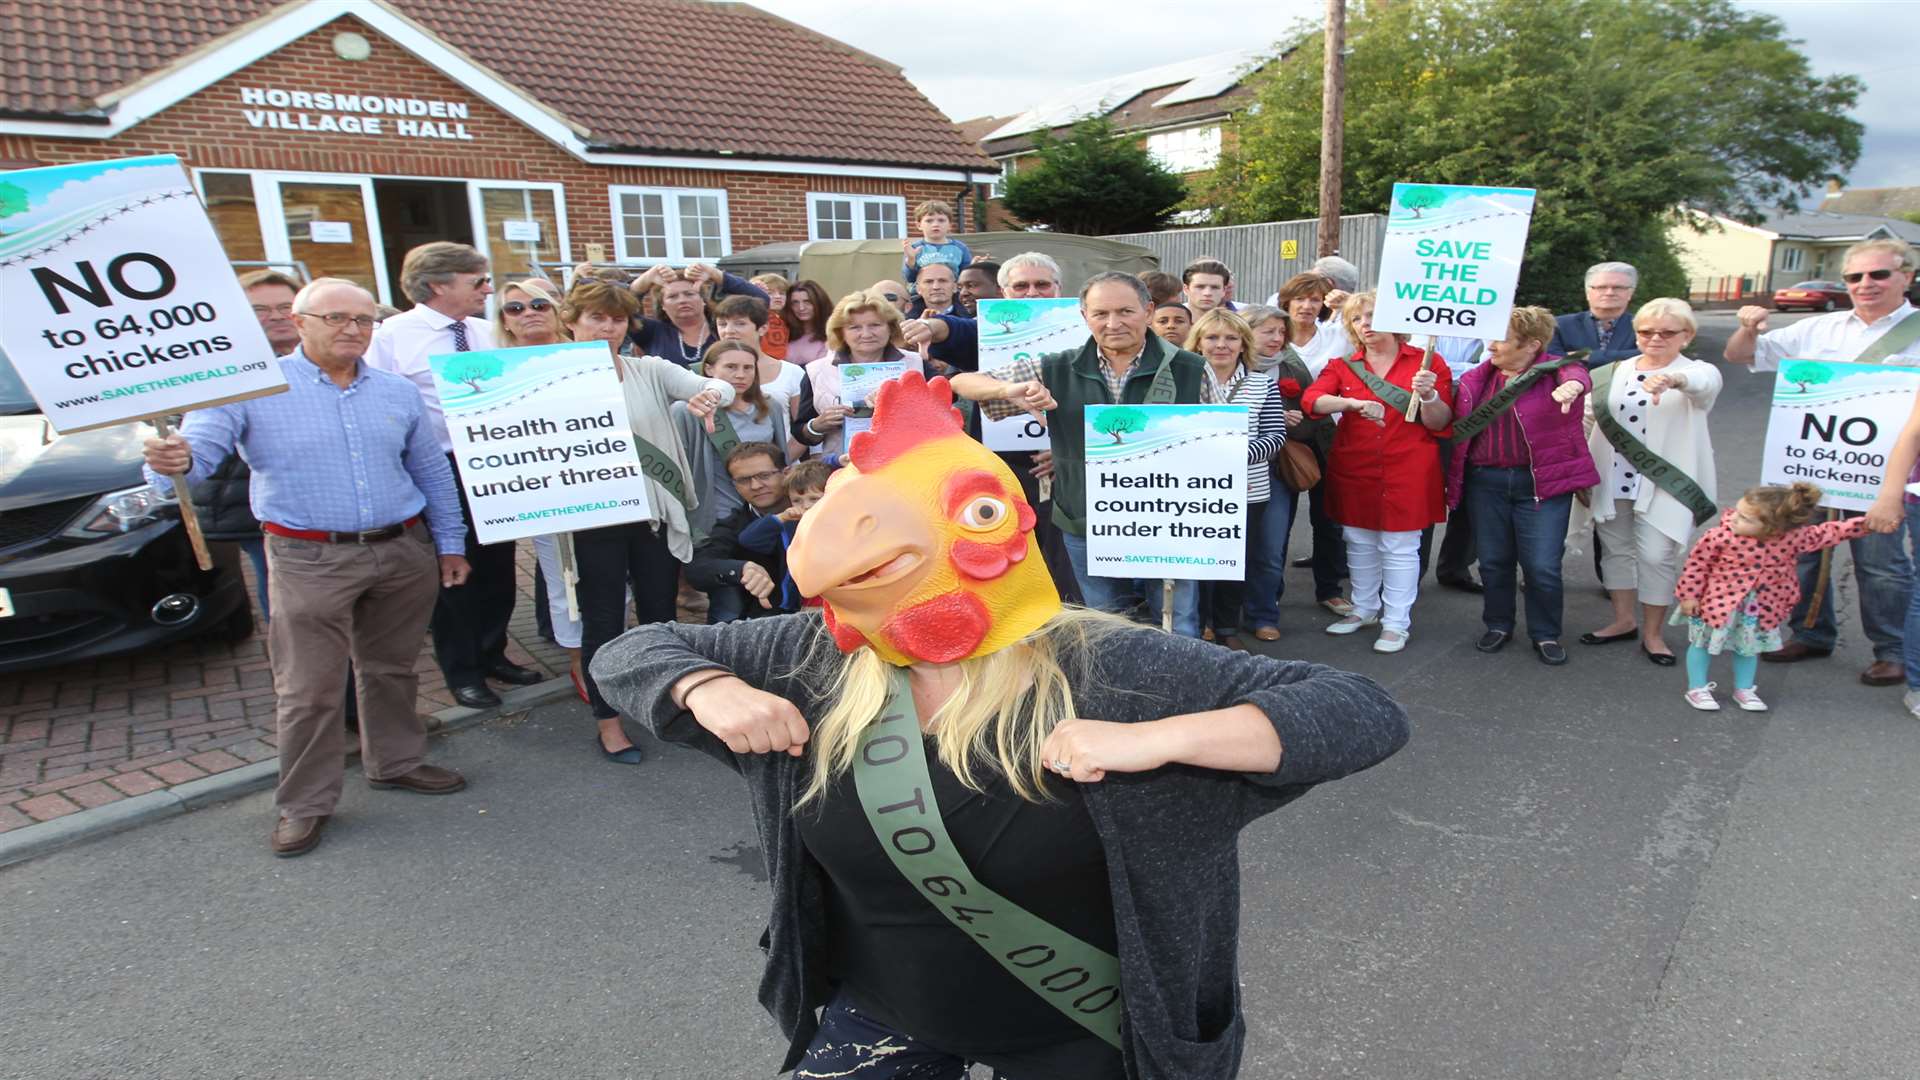 Penny Anderson, organiser, dressed partially as a chicken, with with other protesters outside a public exhibition for a large free range chicken farm proposal at Horsmonden Village Hall